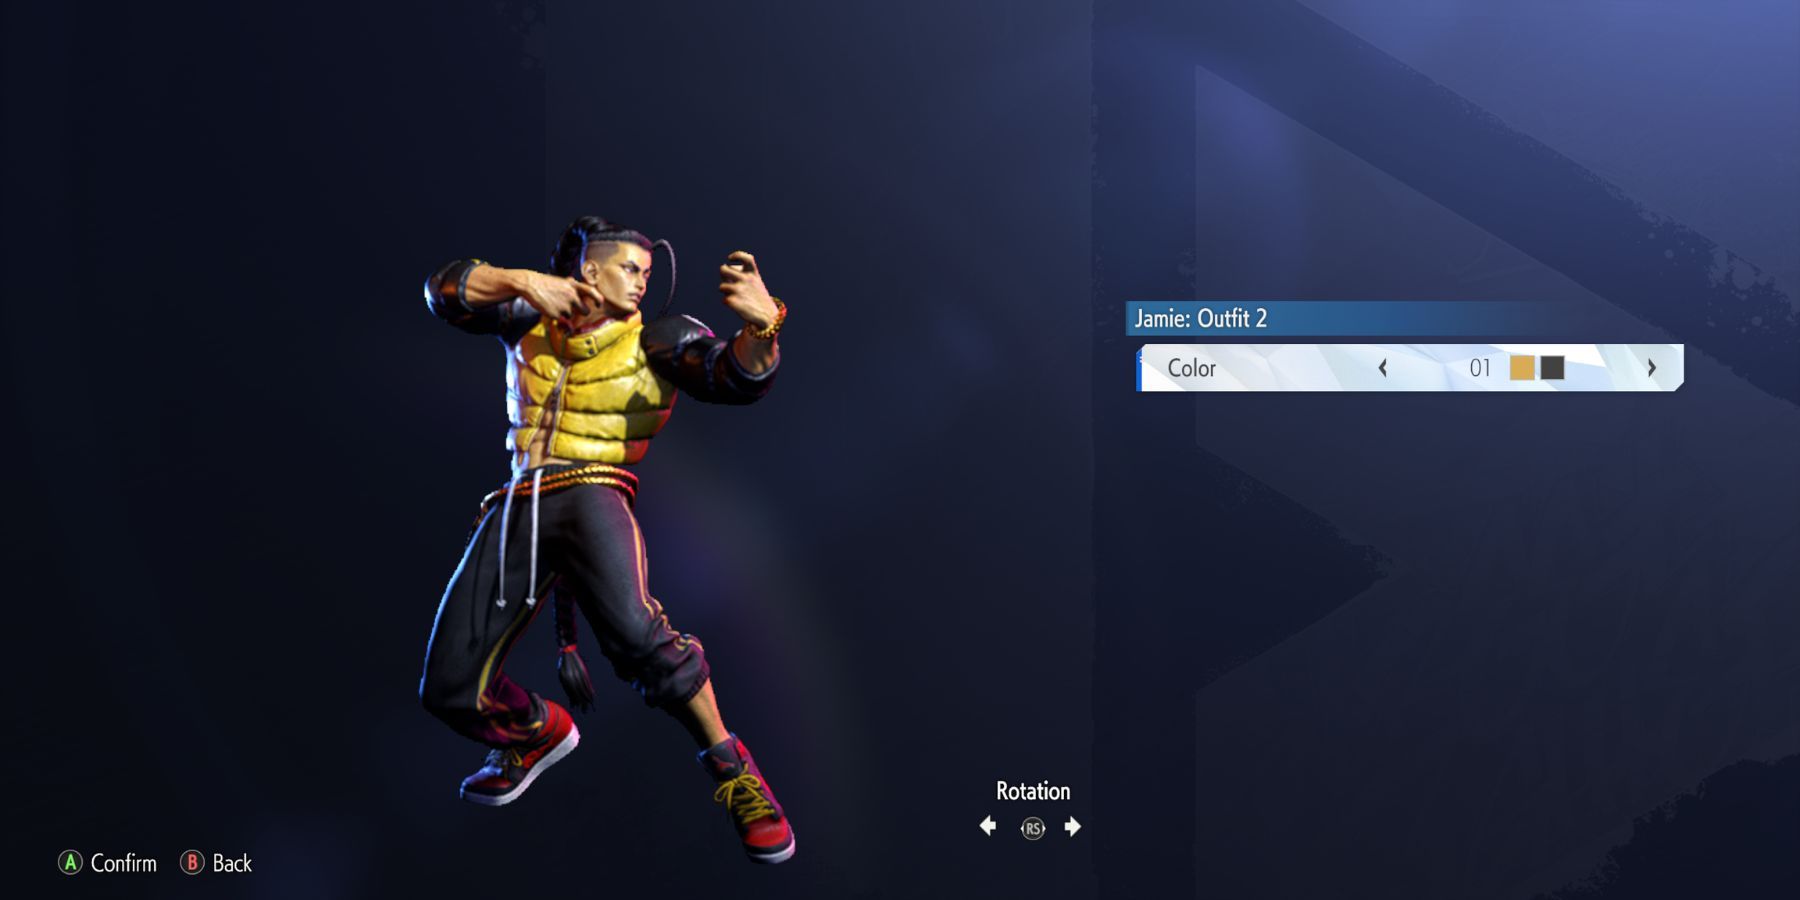 image showing jamie's outfit 2 in street fighter 6.